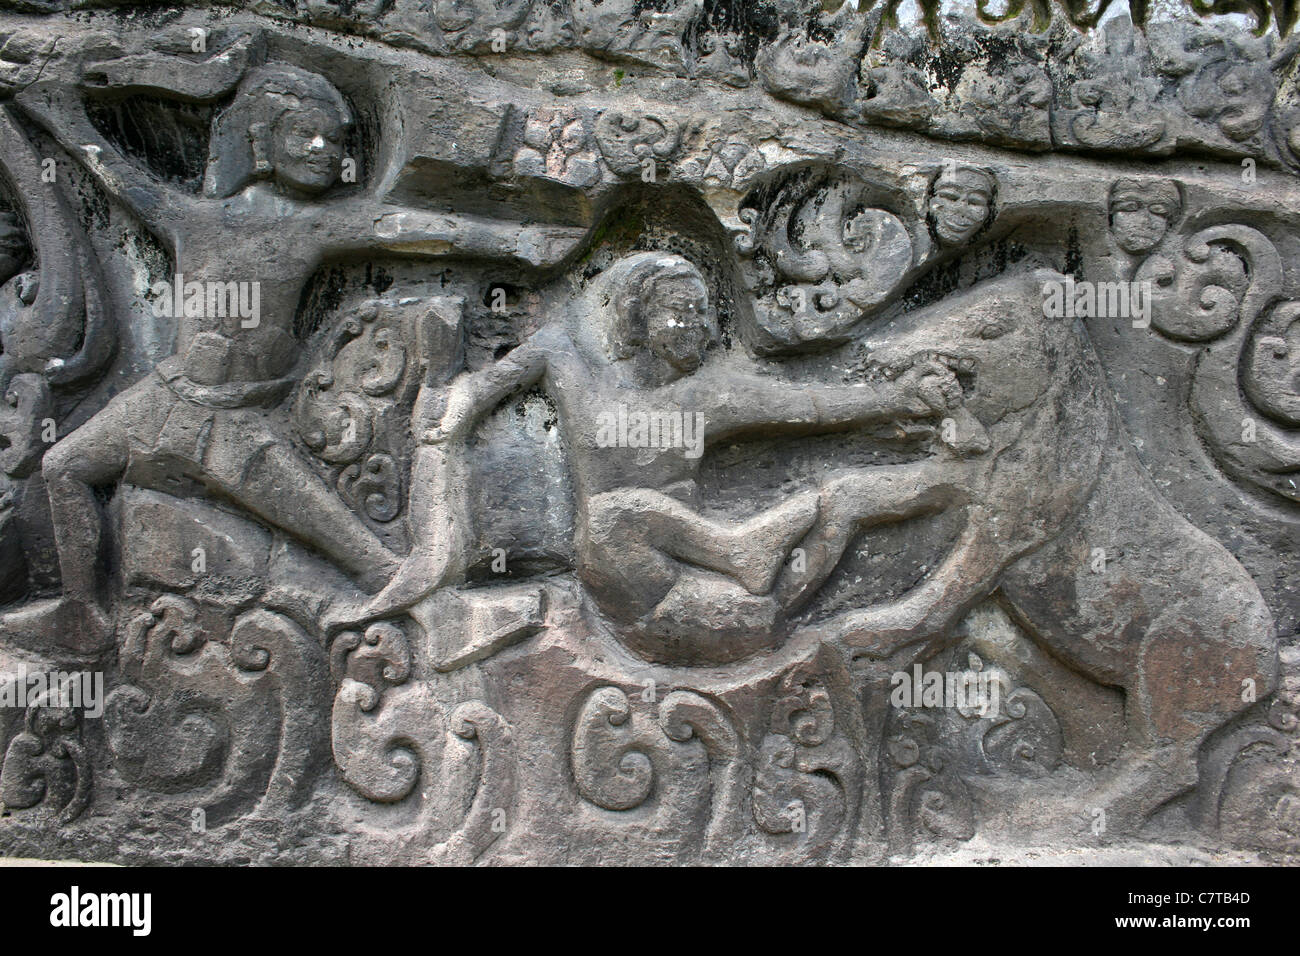 Rock Art Relief Showing Men Hunting Wild Boar at Yeh Pulu, Bali Stock Photo